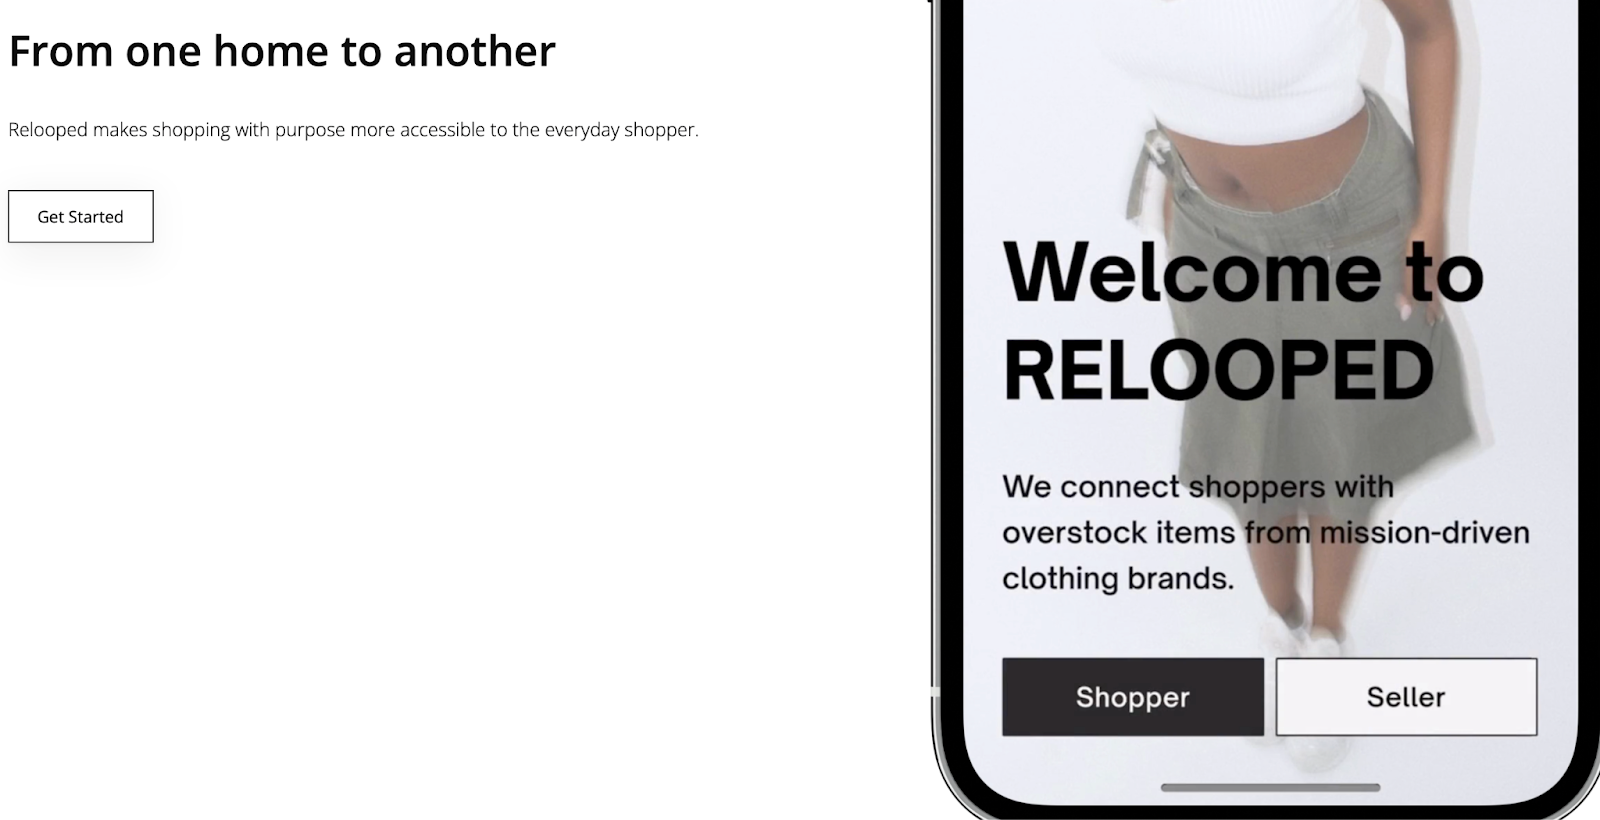 The heading says "From one home to another". To the right, there is a phone screen that reads "Welcome to RELOOPED". Underneath is the text "We connect shoppers with overstock items from mission-driven clothing brands".